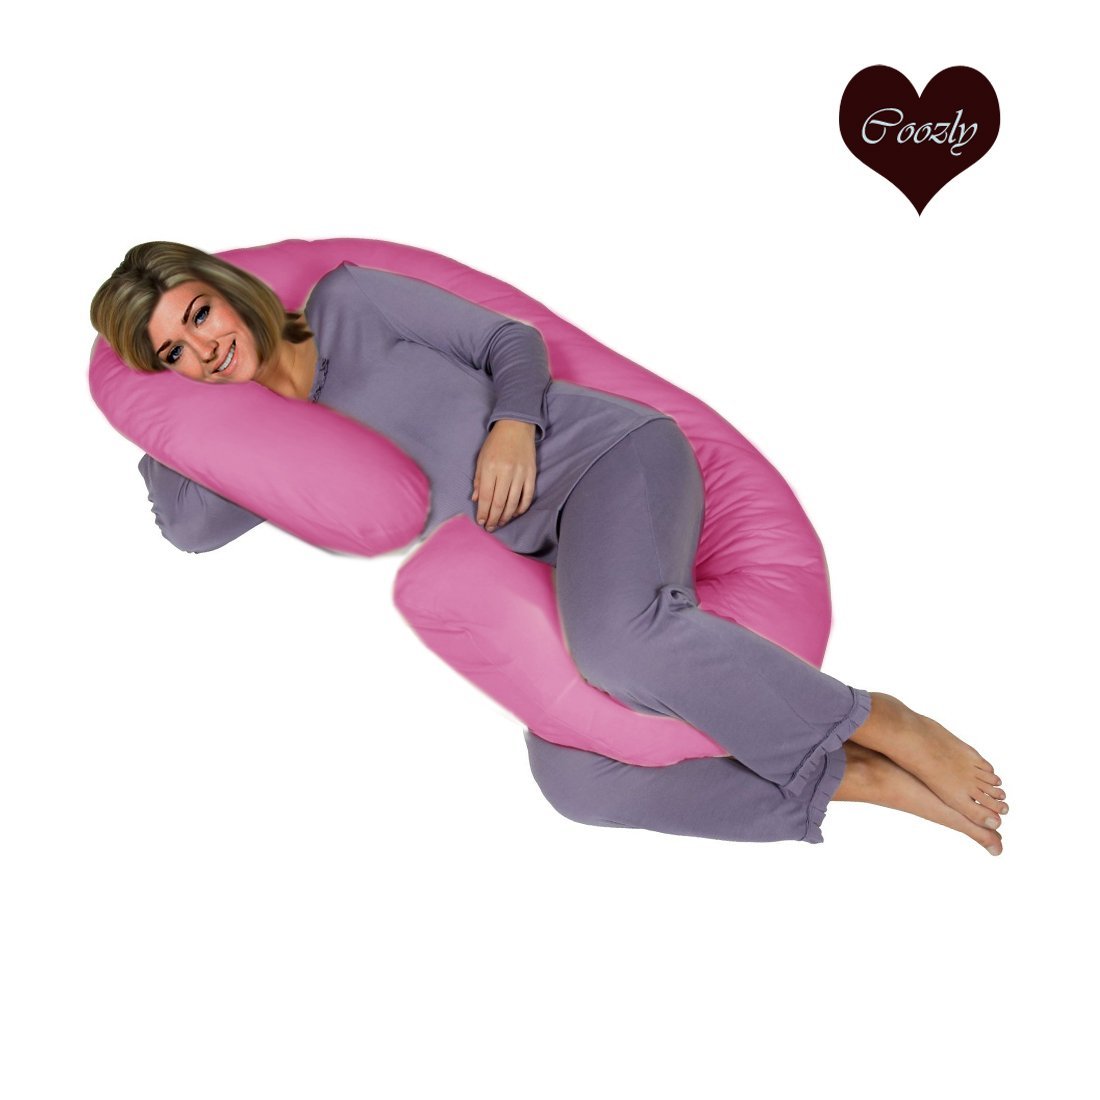 Pink-Coozly C Basic Pregnancy Body Pillow | Maternity Pillow